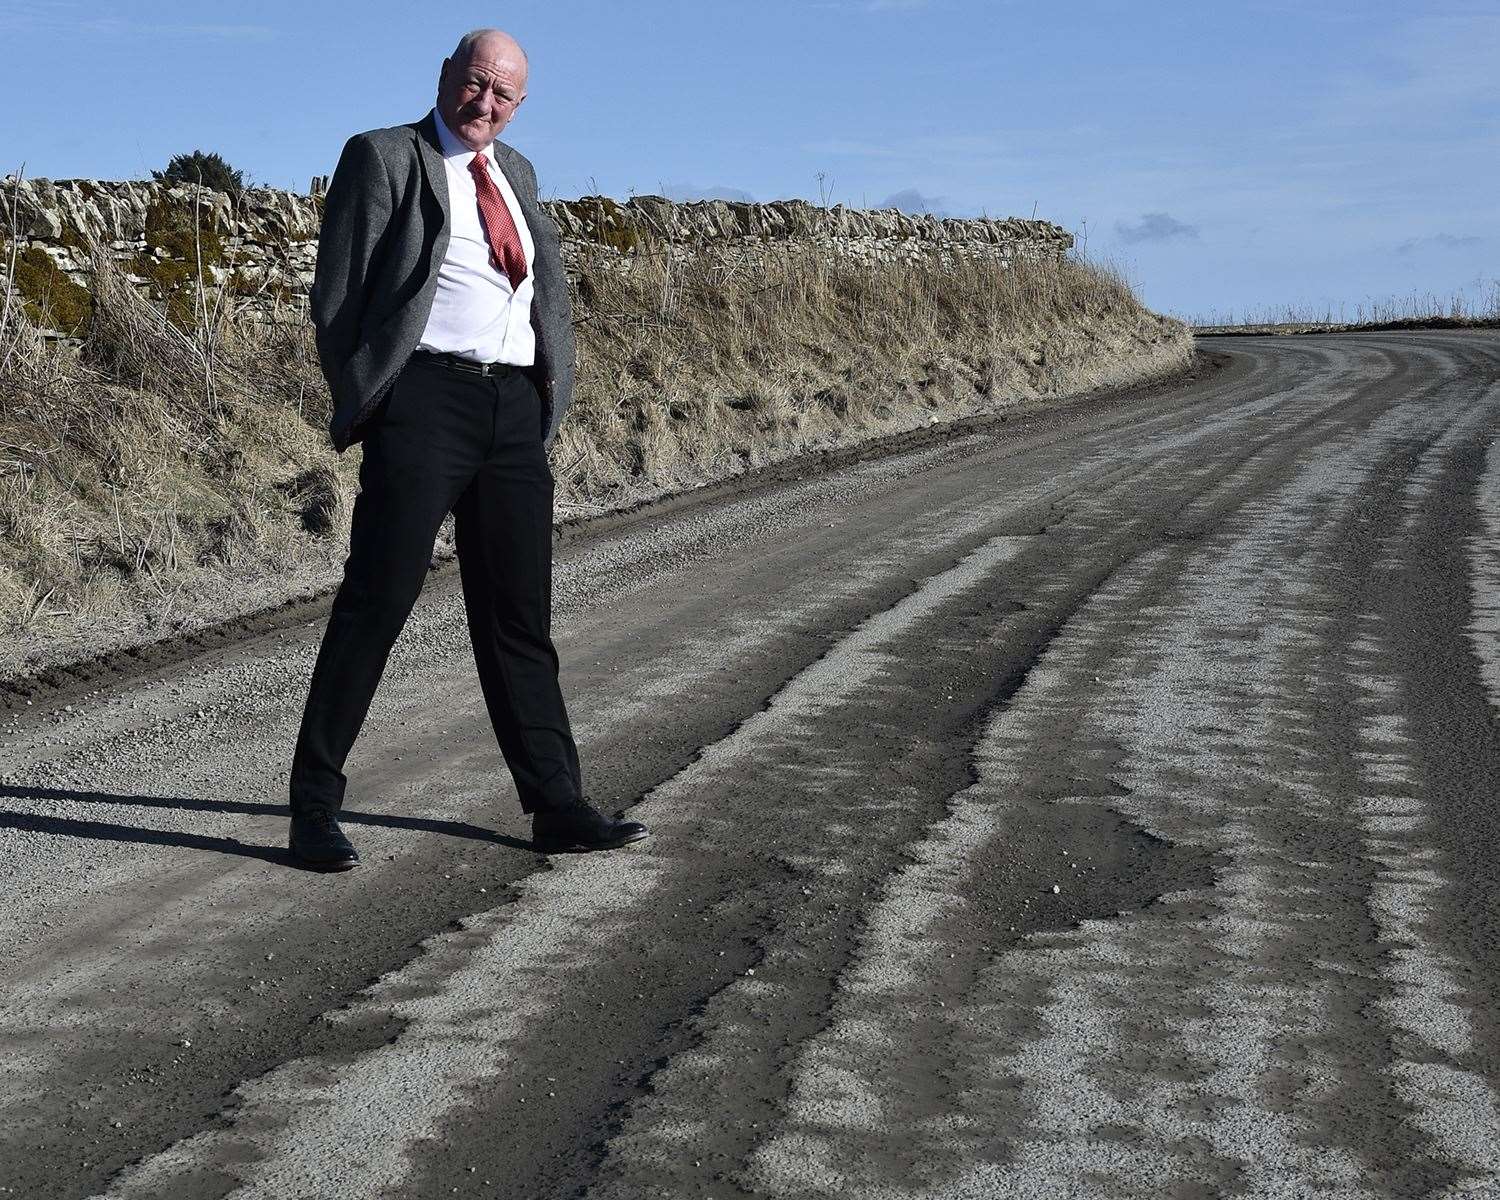 Iain Gregory of Caithness Roads Recovery at a deteriorating section of road on the B870 at North Calder. He warned: 'We have reached a point where it is only a matter of time before a tragedy occurs, and urgent action is needed.' Picture: Mel Roger